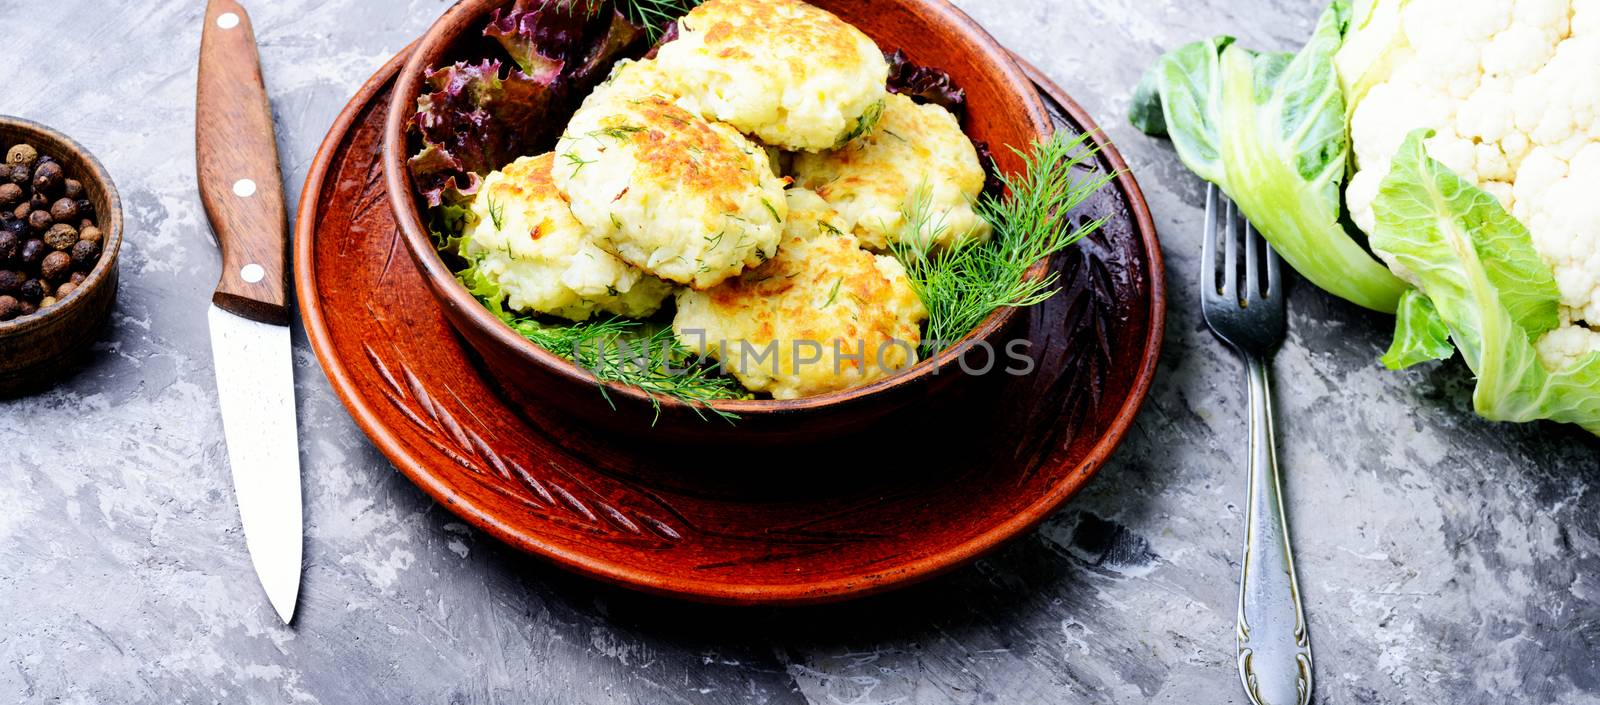 Healthy fried vegetable rissole with cabbage.Vegetarian rissole